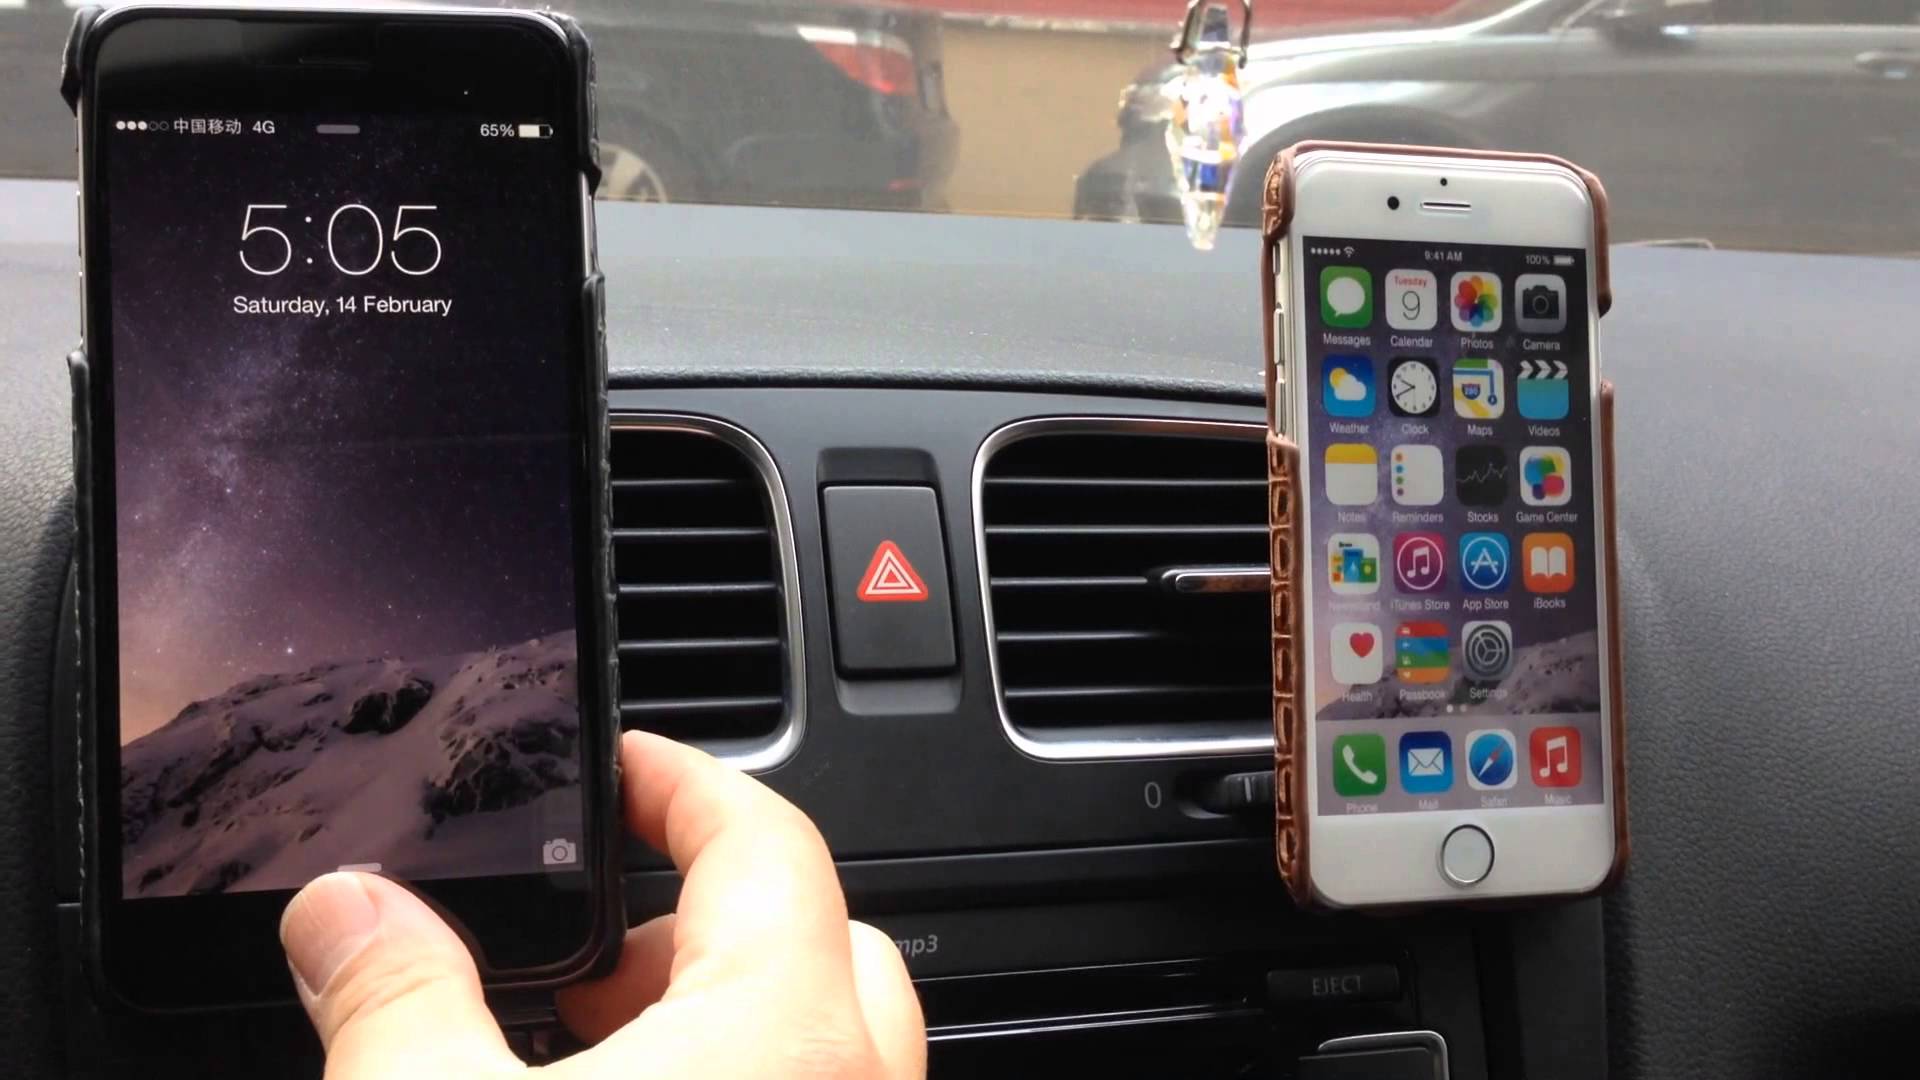  Will the Magnetic mobile holder in the car affect your phone?